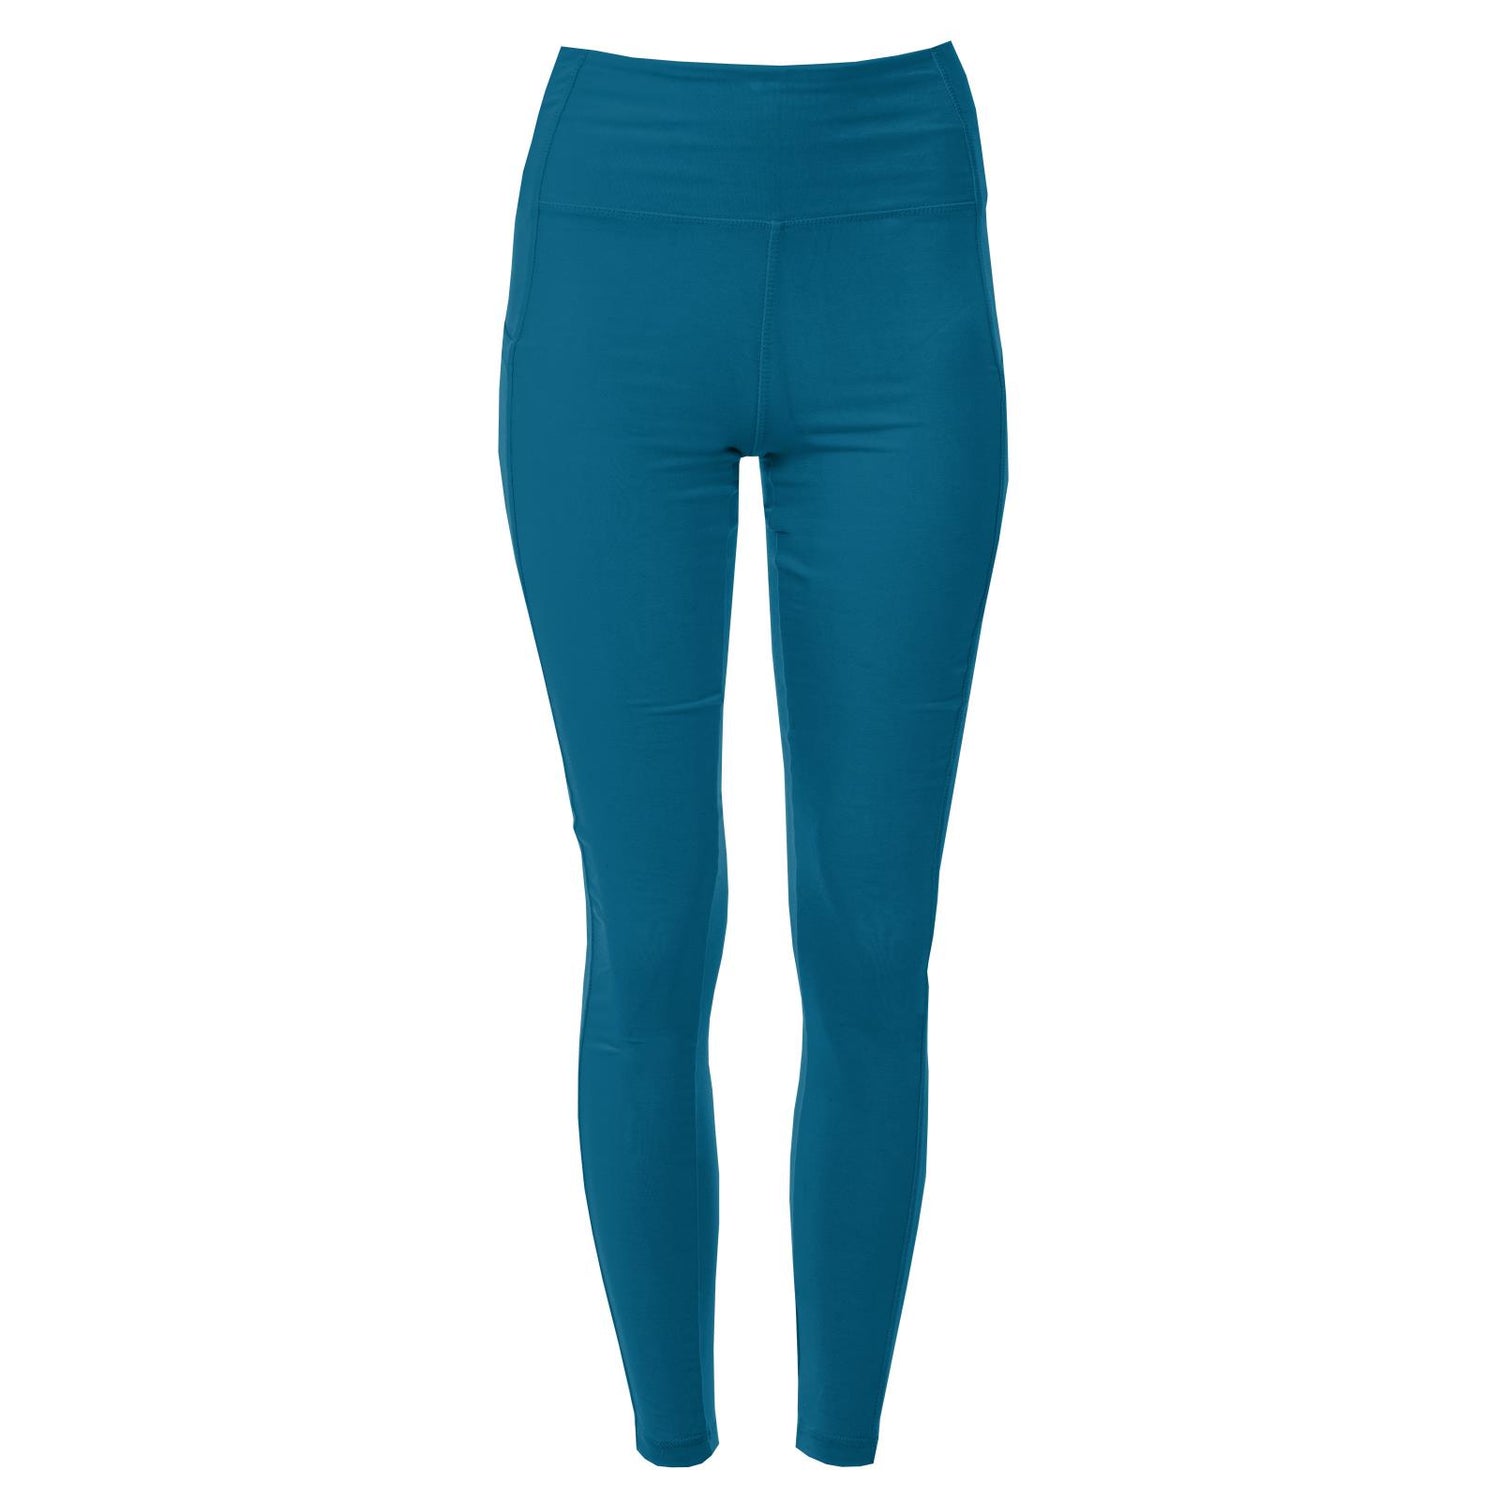 Women's Solid Luxe Stretch Leggings with Pockets in Seaport